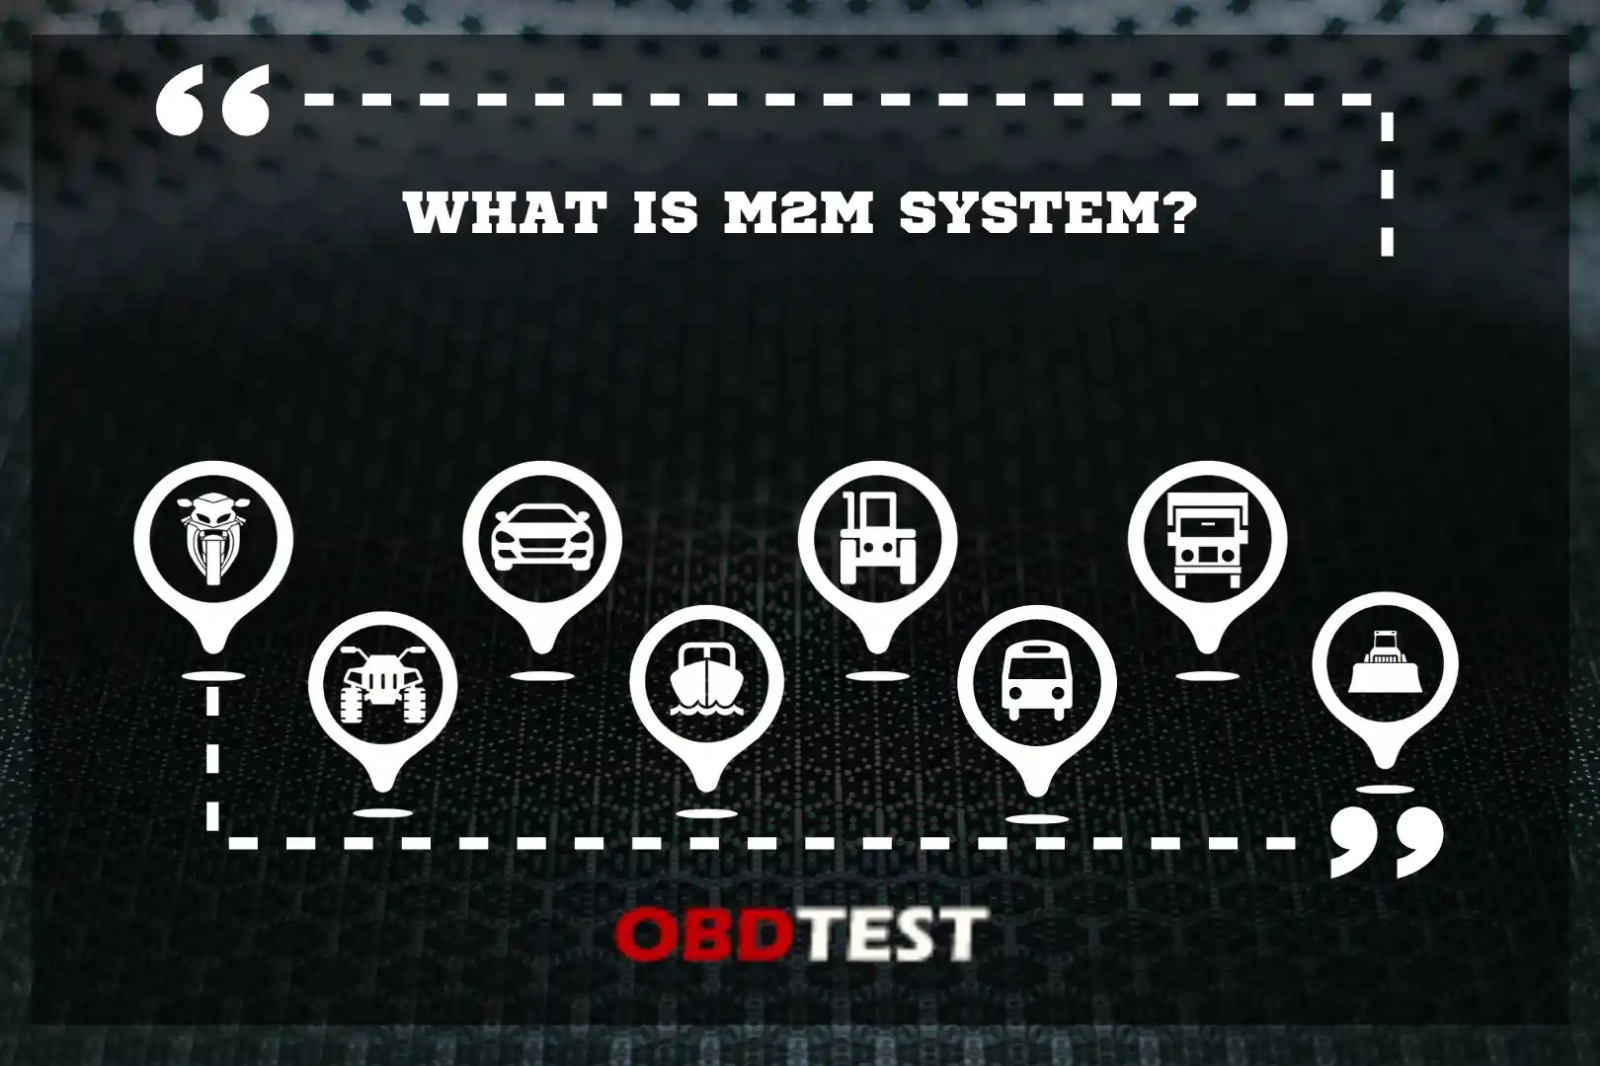 What is M2M system?